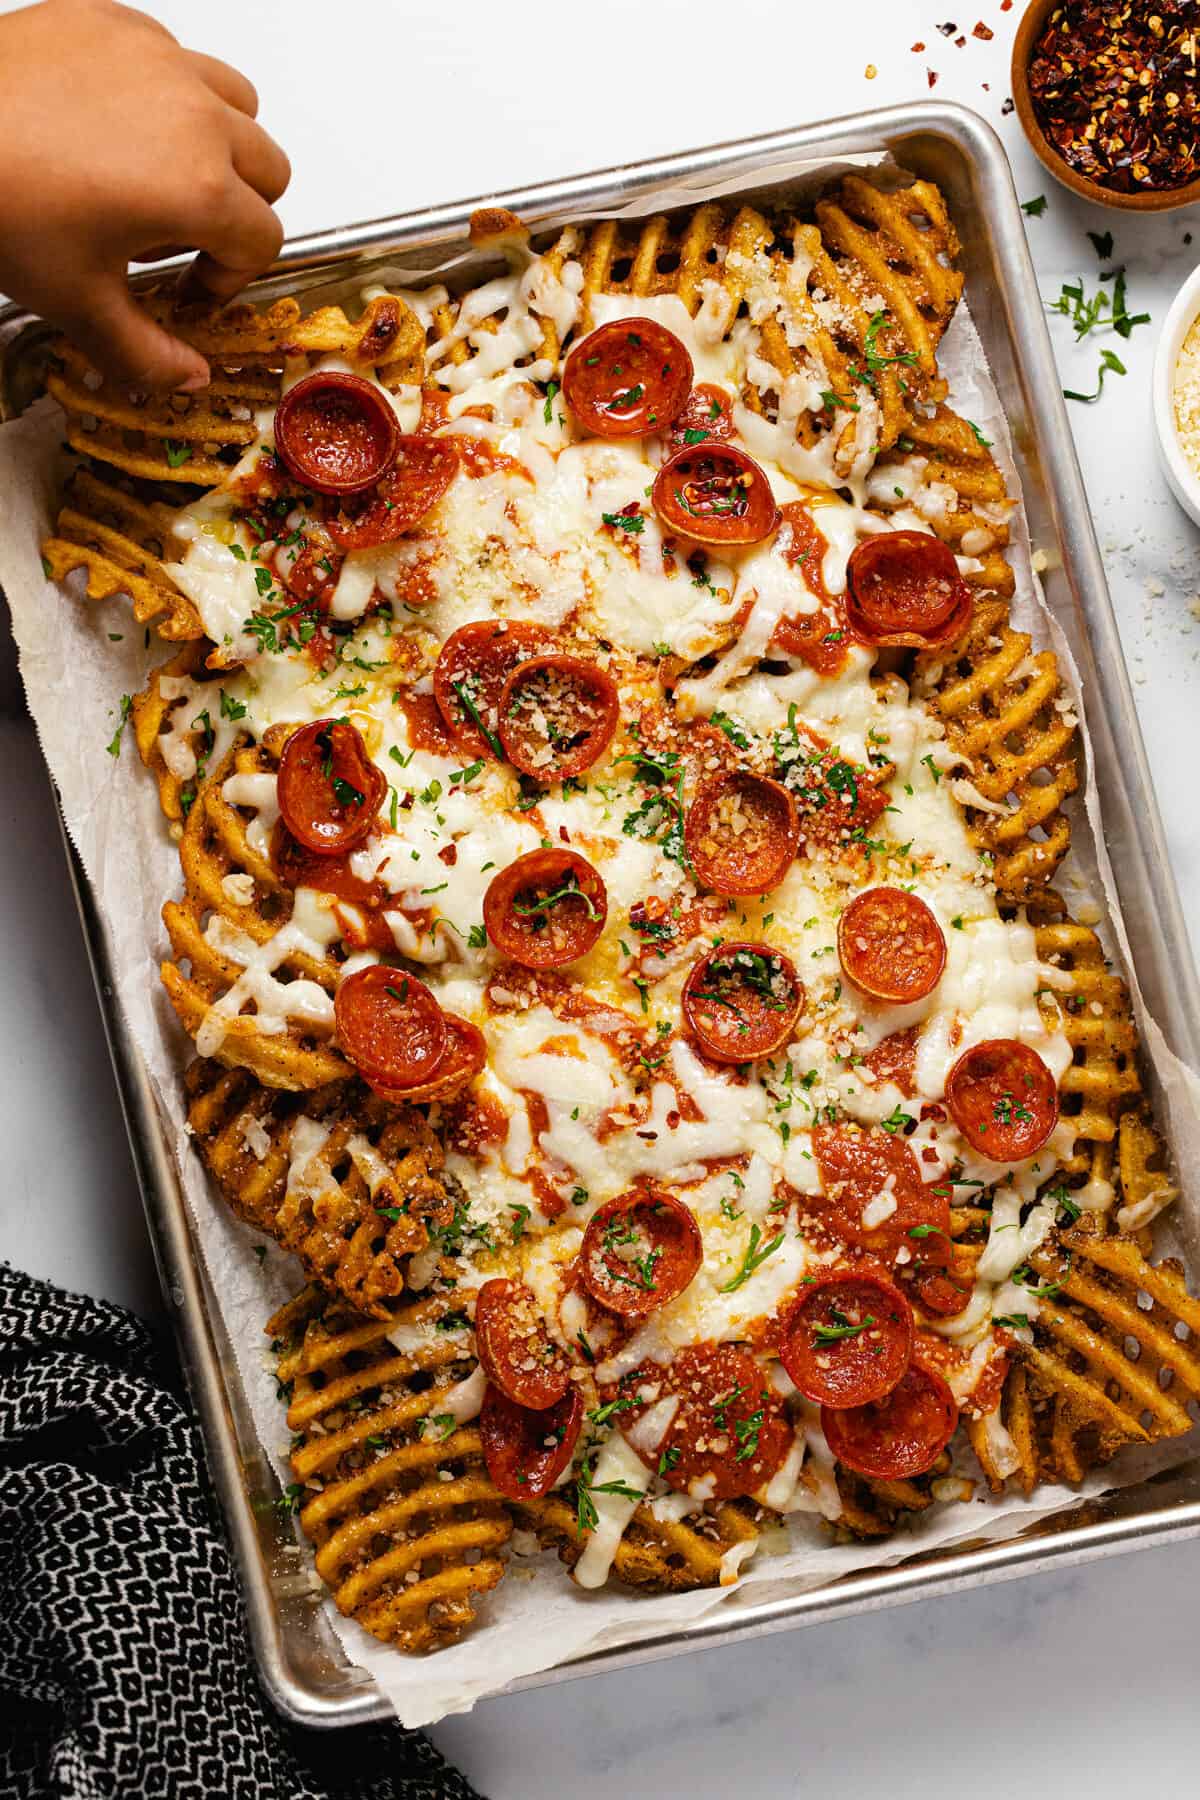 A small baking sheet filled with homemade pizza fries garnished with Parmesan and parsley